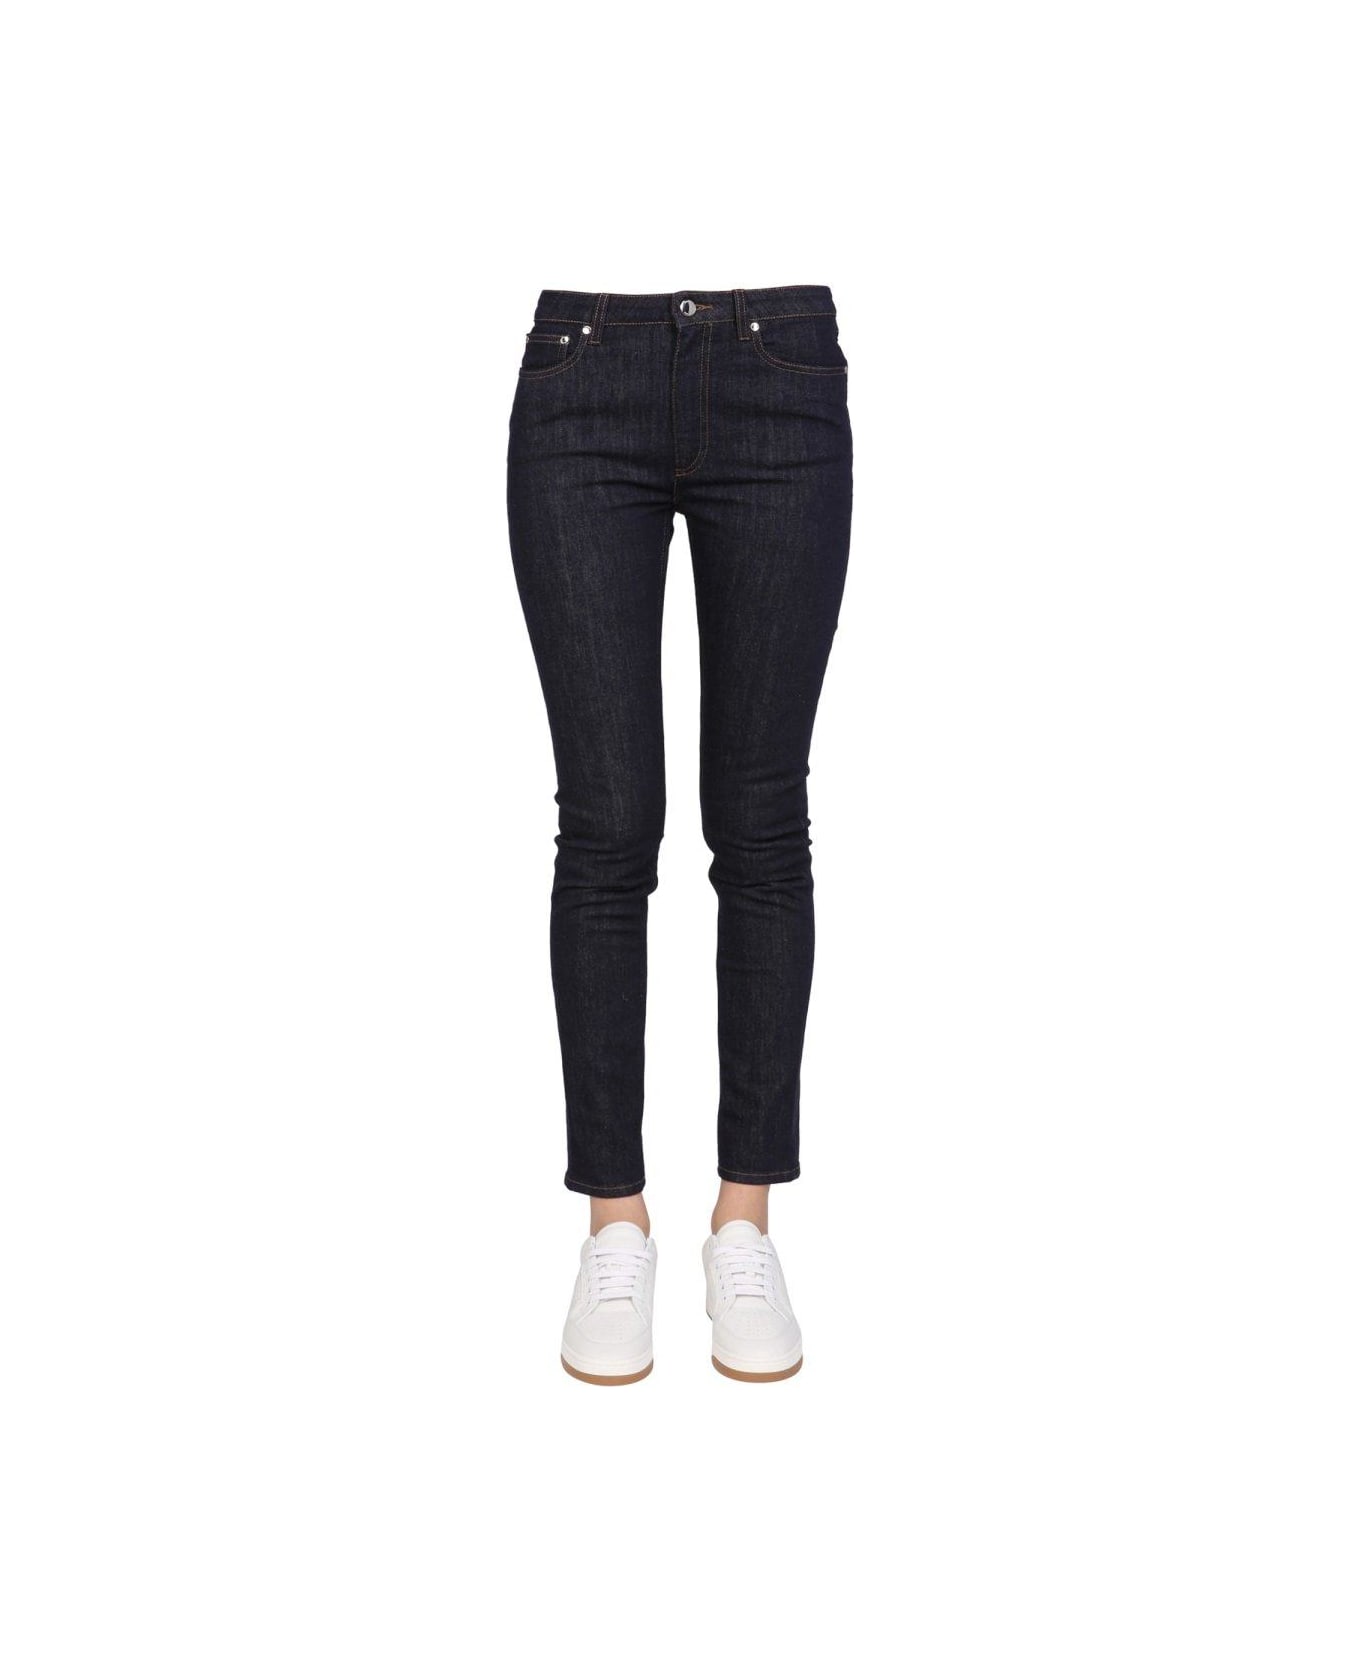 Burberry Mid-rise Slim Fit Jeans - BLUE デニム